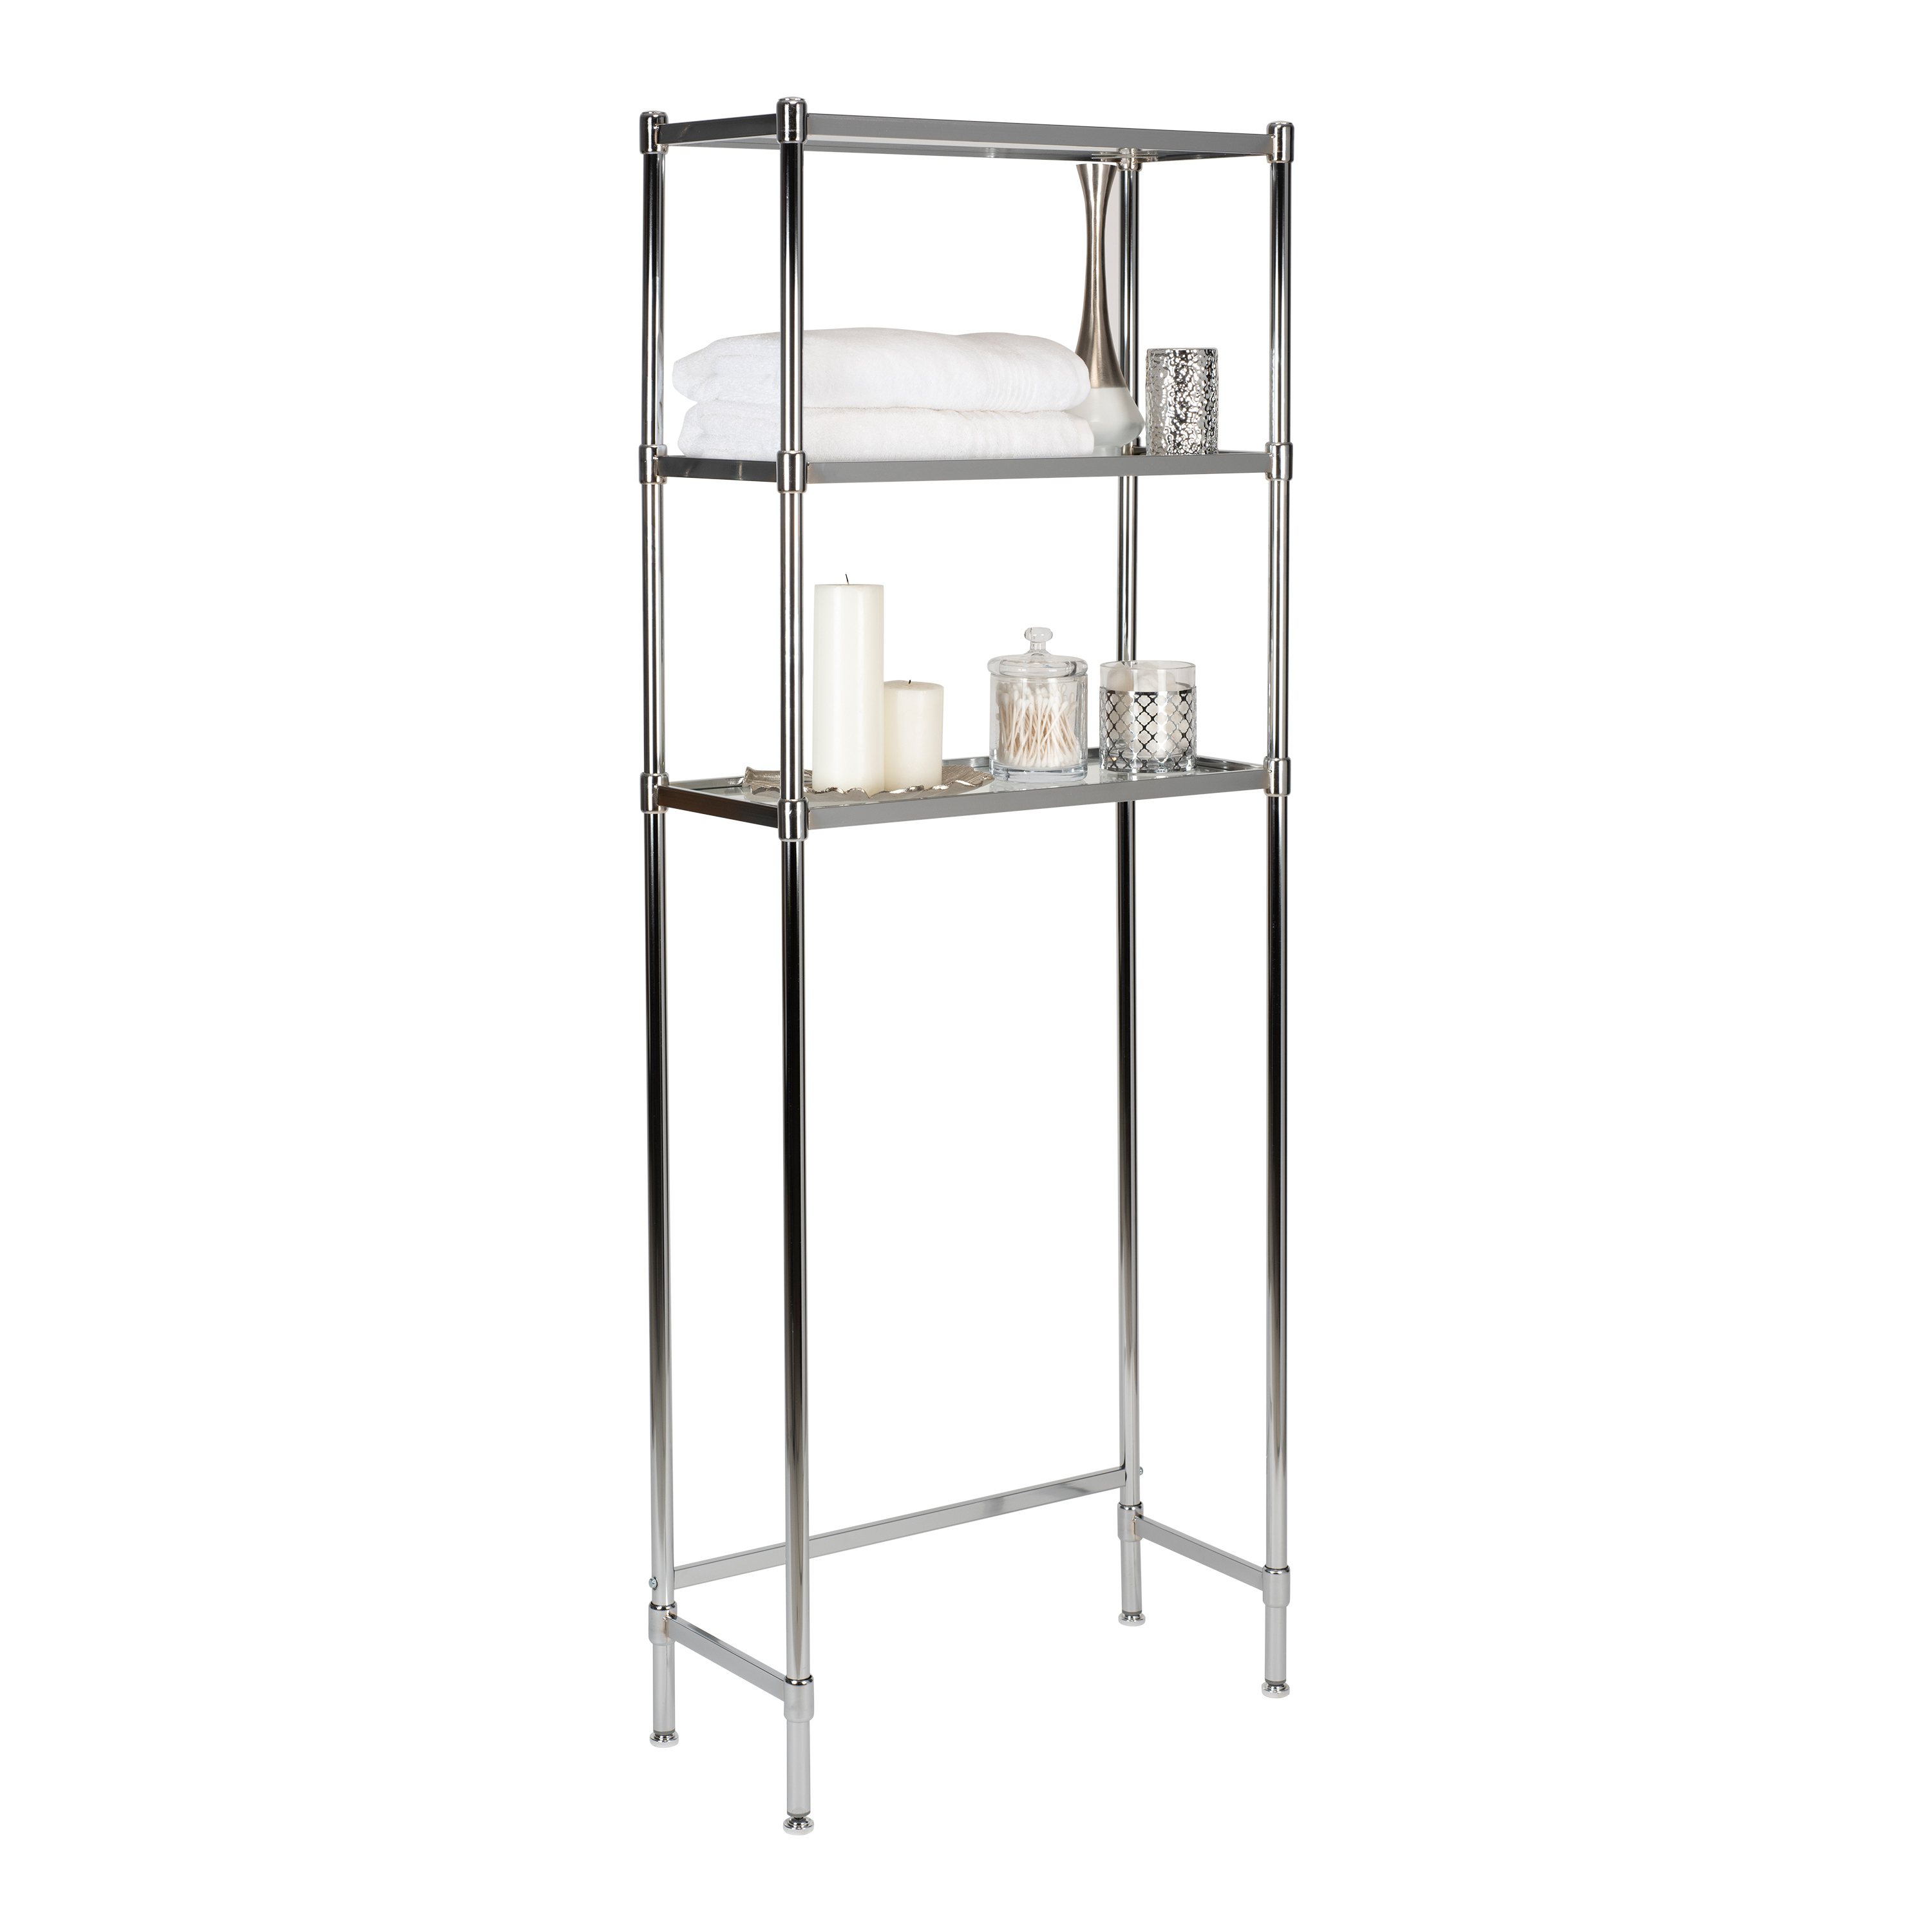 Organize It All 3 Tier Glass Shelf Space Saver - image 4 of 7